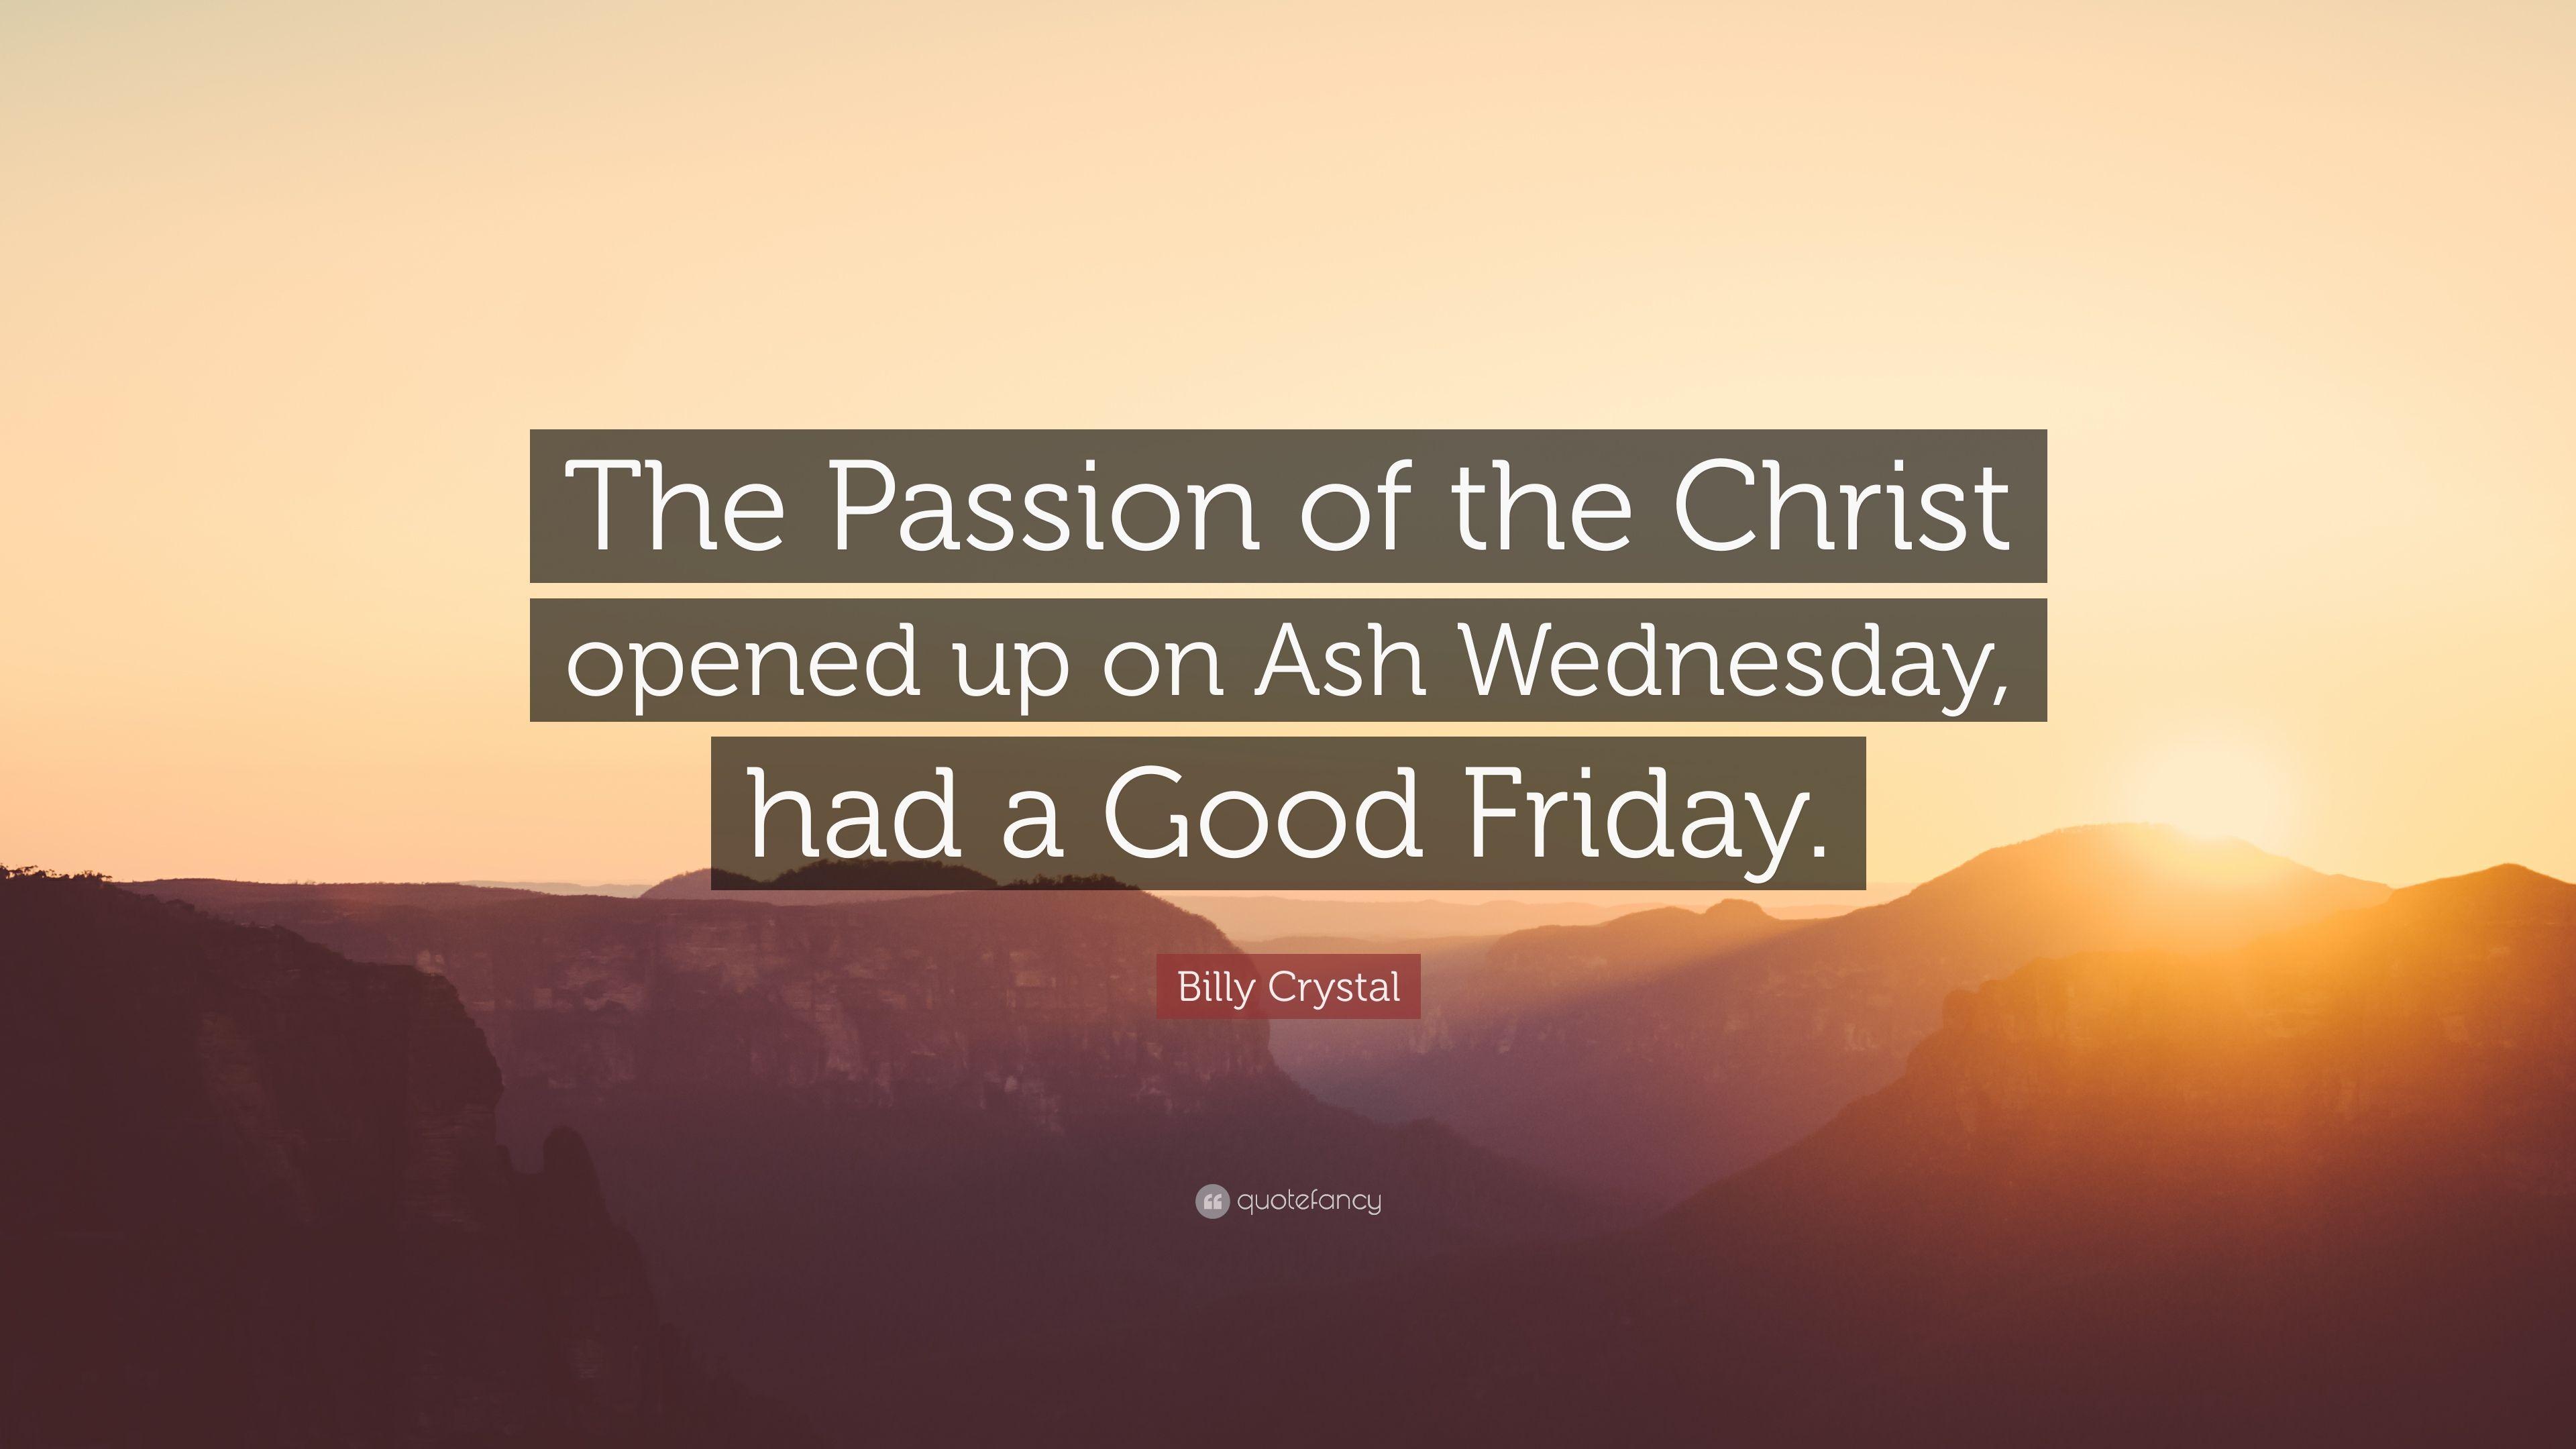 Billy Crystal Quote: “The Passion of the Christ opened up on Ash